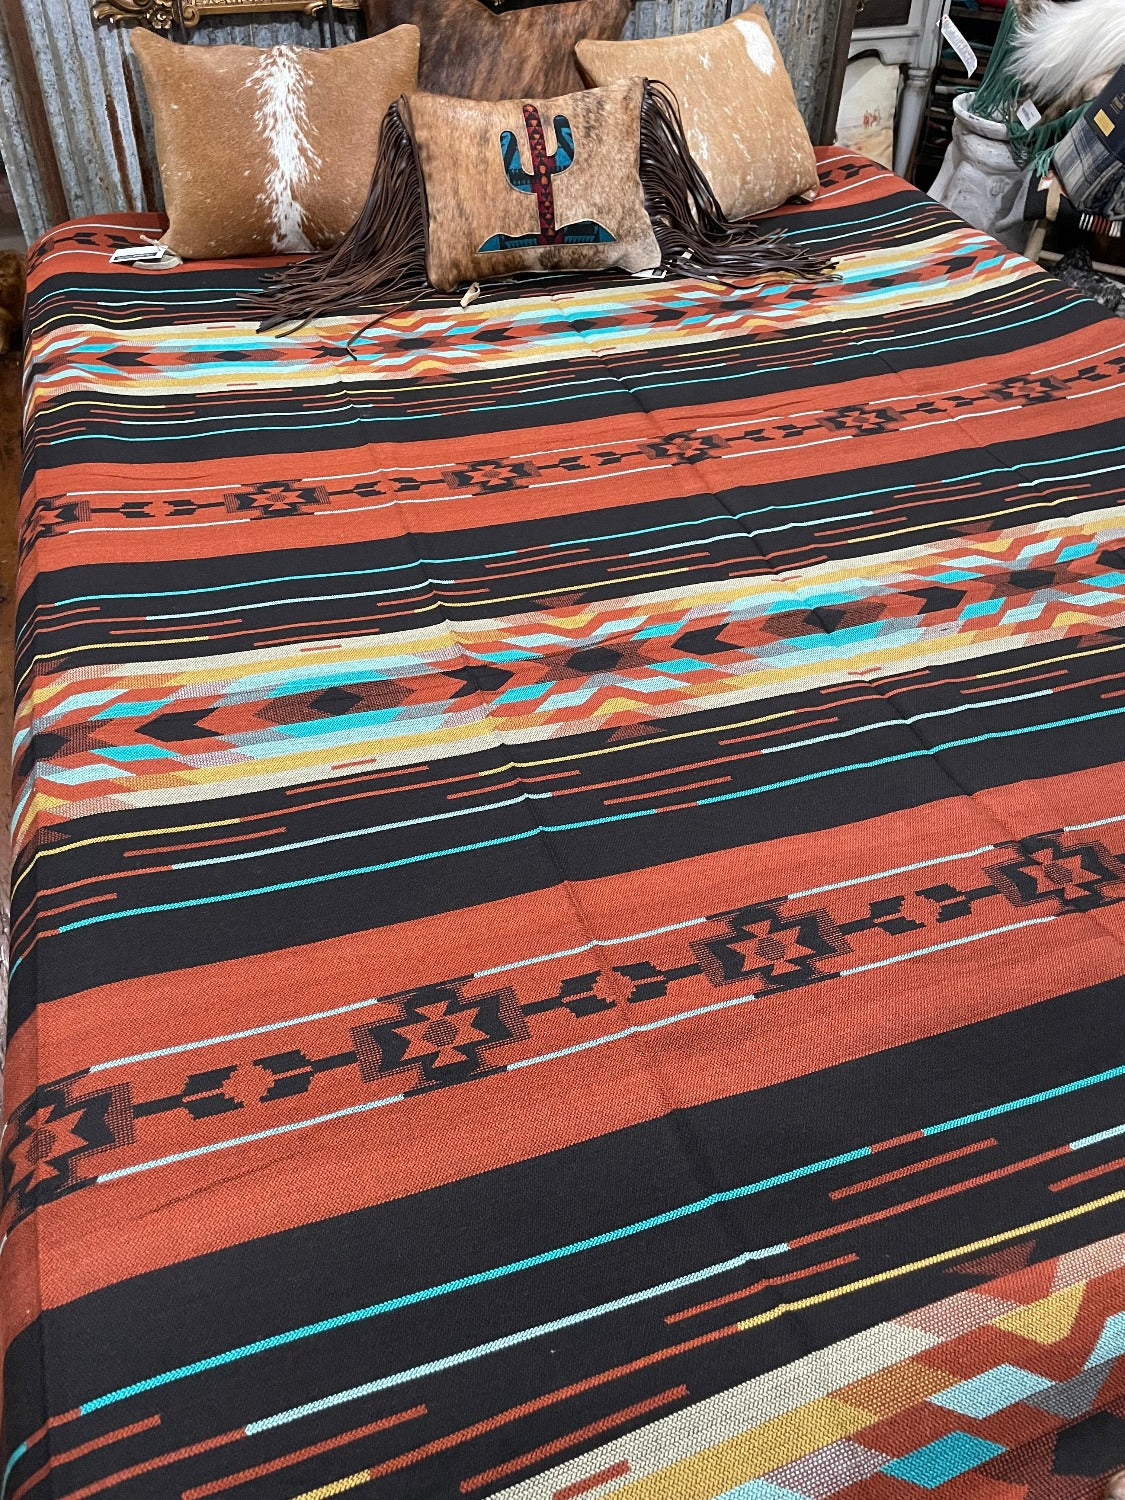 Southwestern Bedspread, Rust, Black and Turquoise Queen  7041C